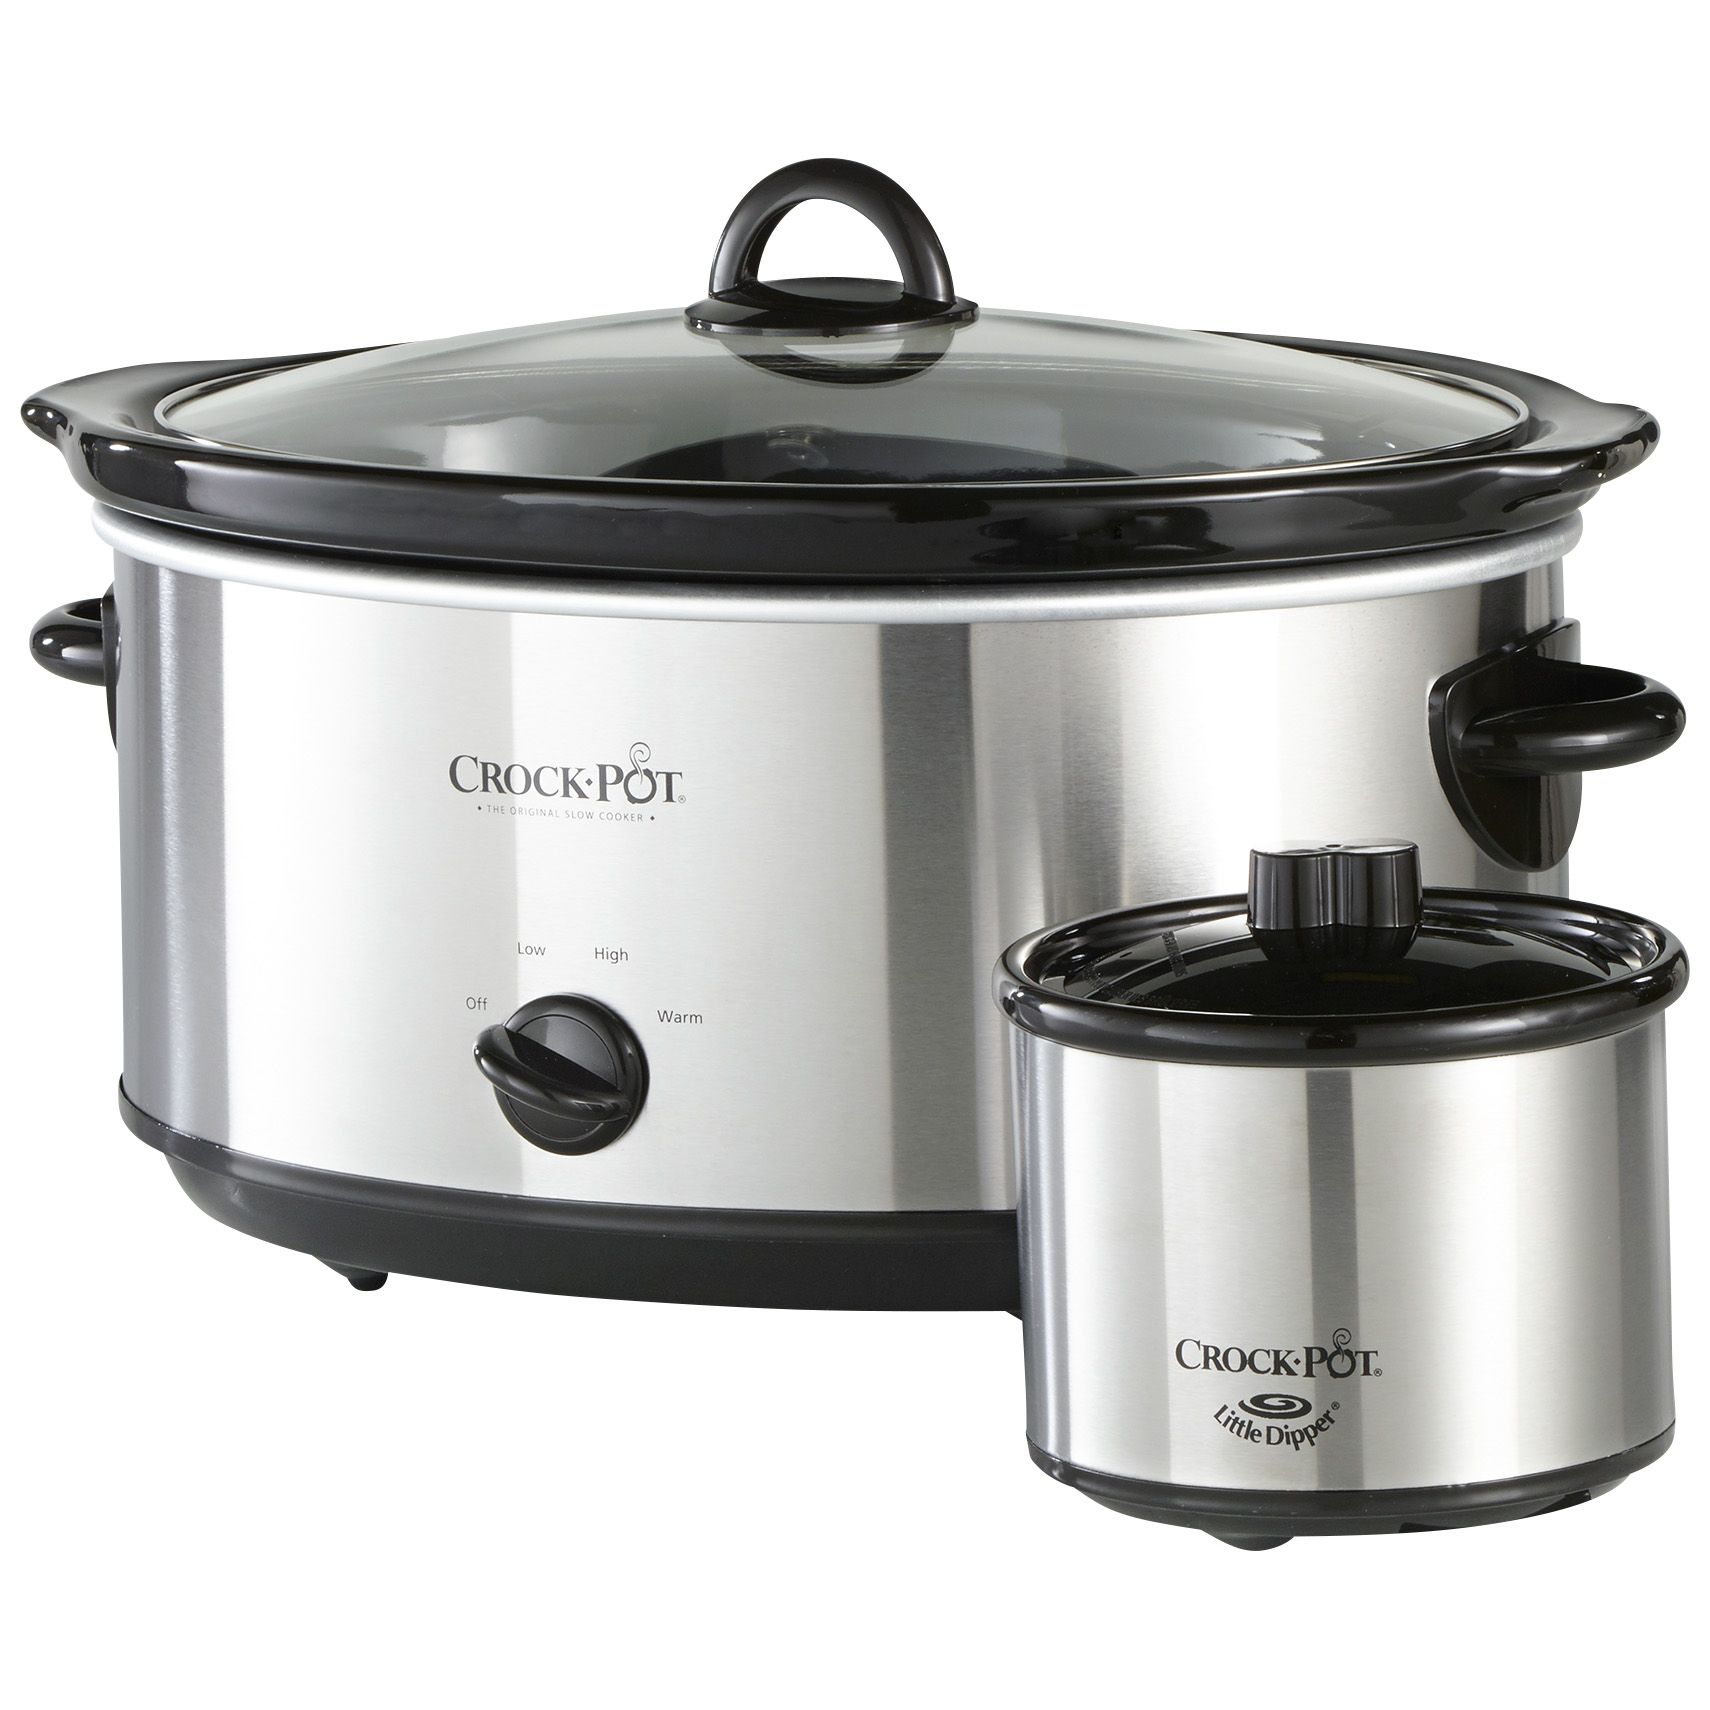 Crock-Pot Slow Cooker with Little Dipper Warmer, 2 pc - Fry's Food